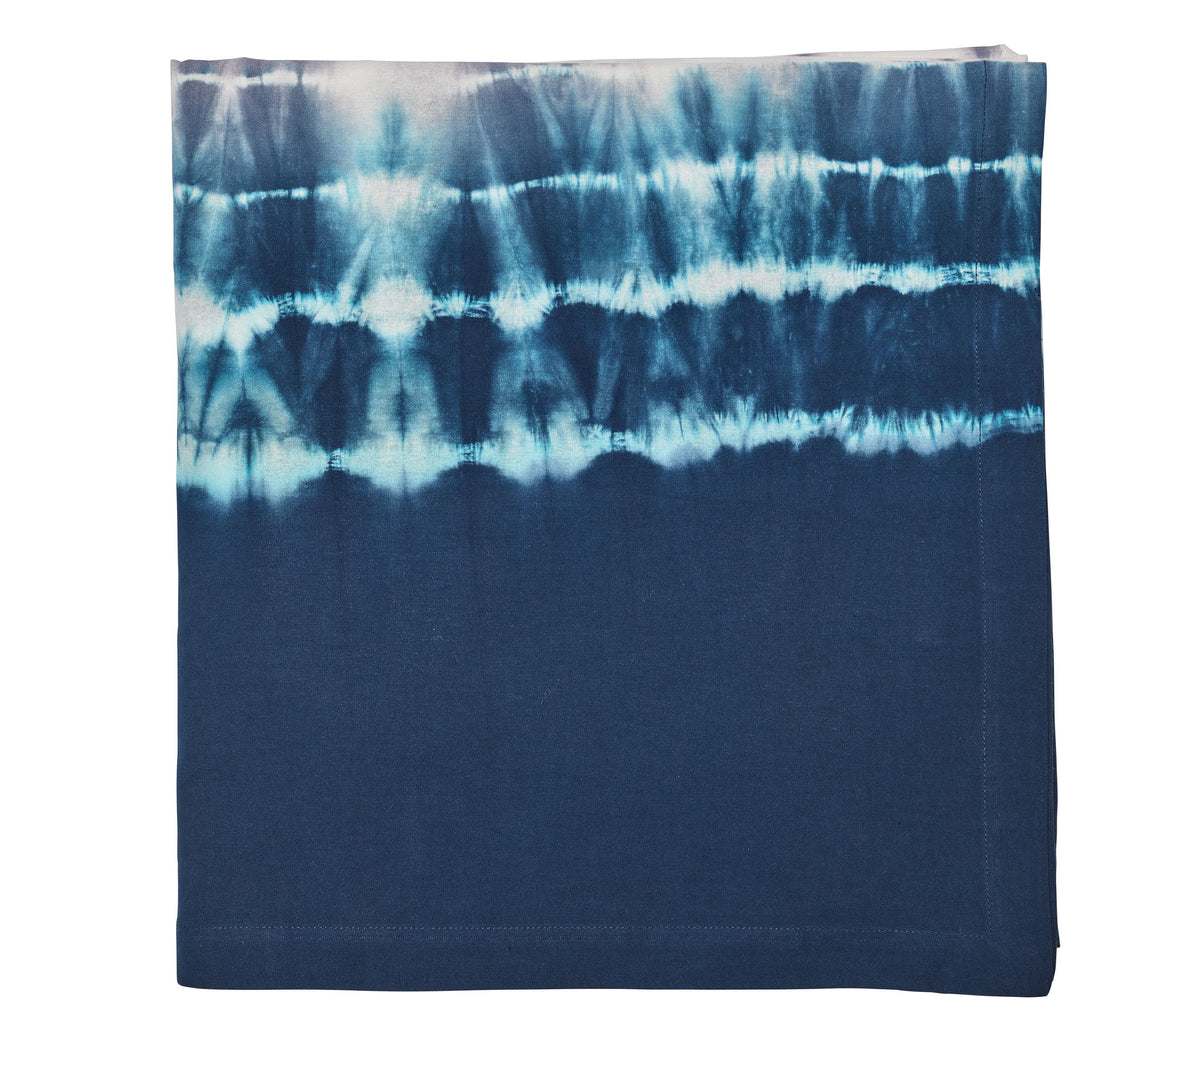 Duo Dye Tablecloth in Navy & Periwinkle